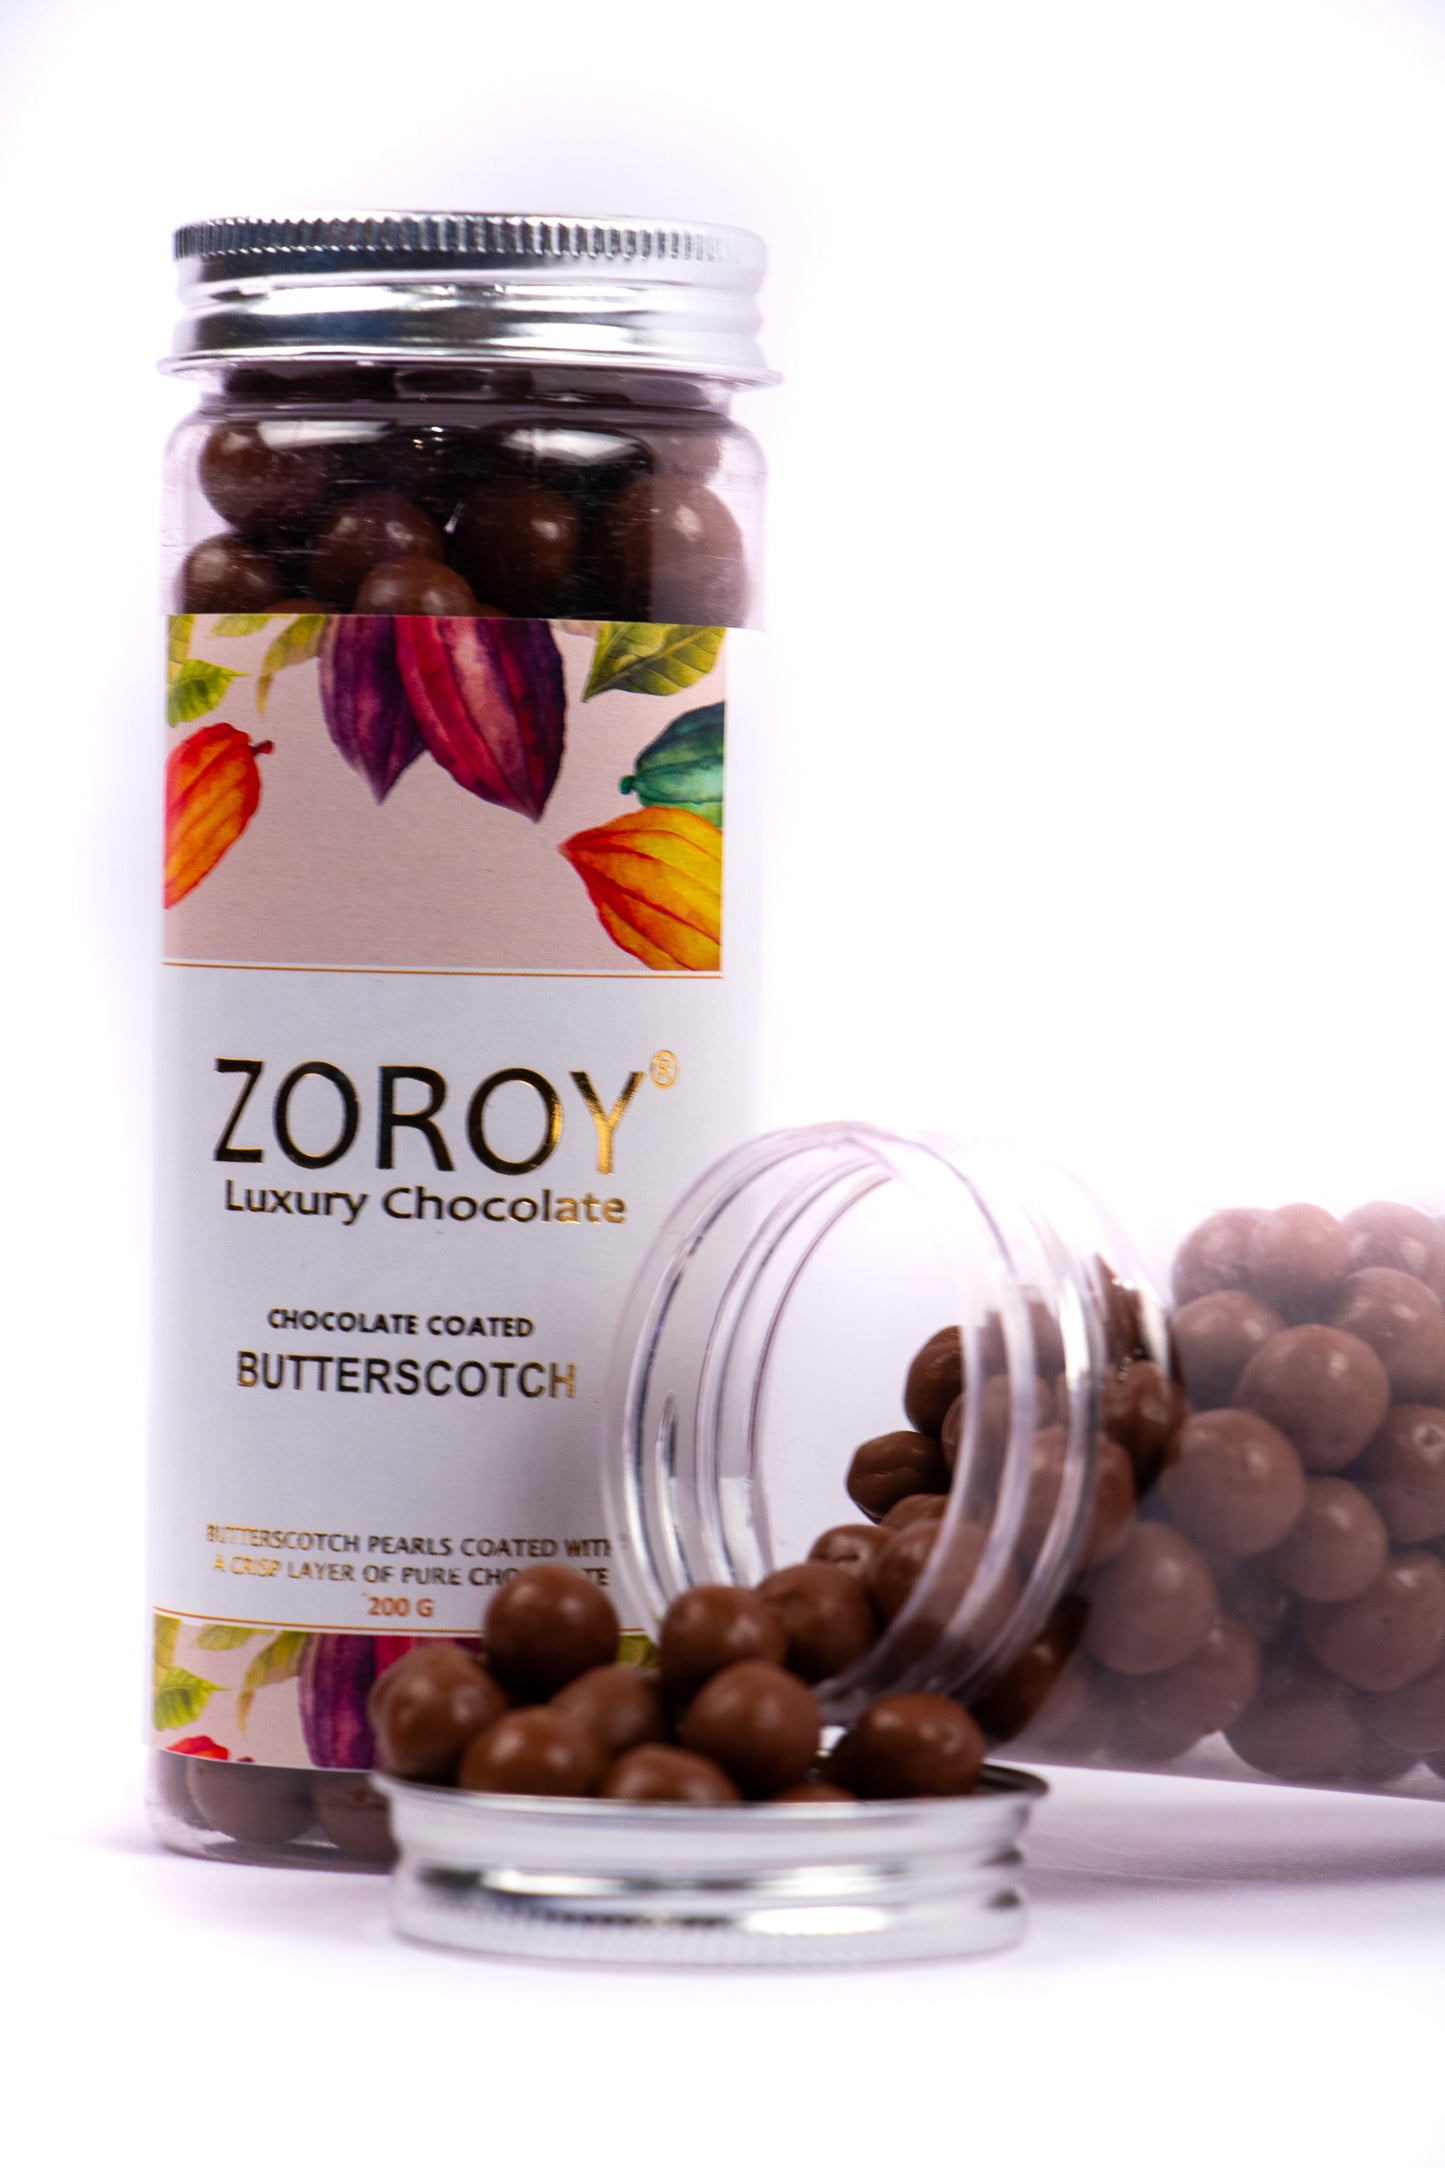 ZOROY Luxury Chocolate Christmas Jute Briefcase Gift Hamper Combo for Corporate Celebration Xmas Family Box Belgian style pure chocolate bars dehydrated fruits plum cake drinking chocolate nut butter